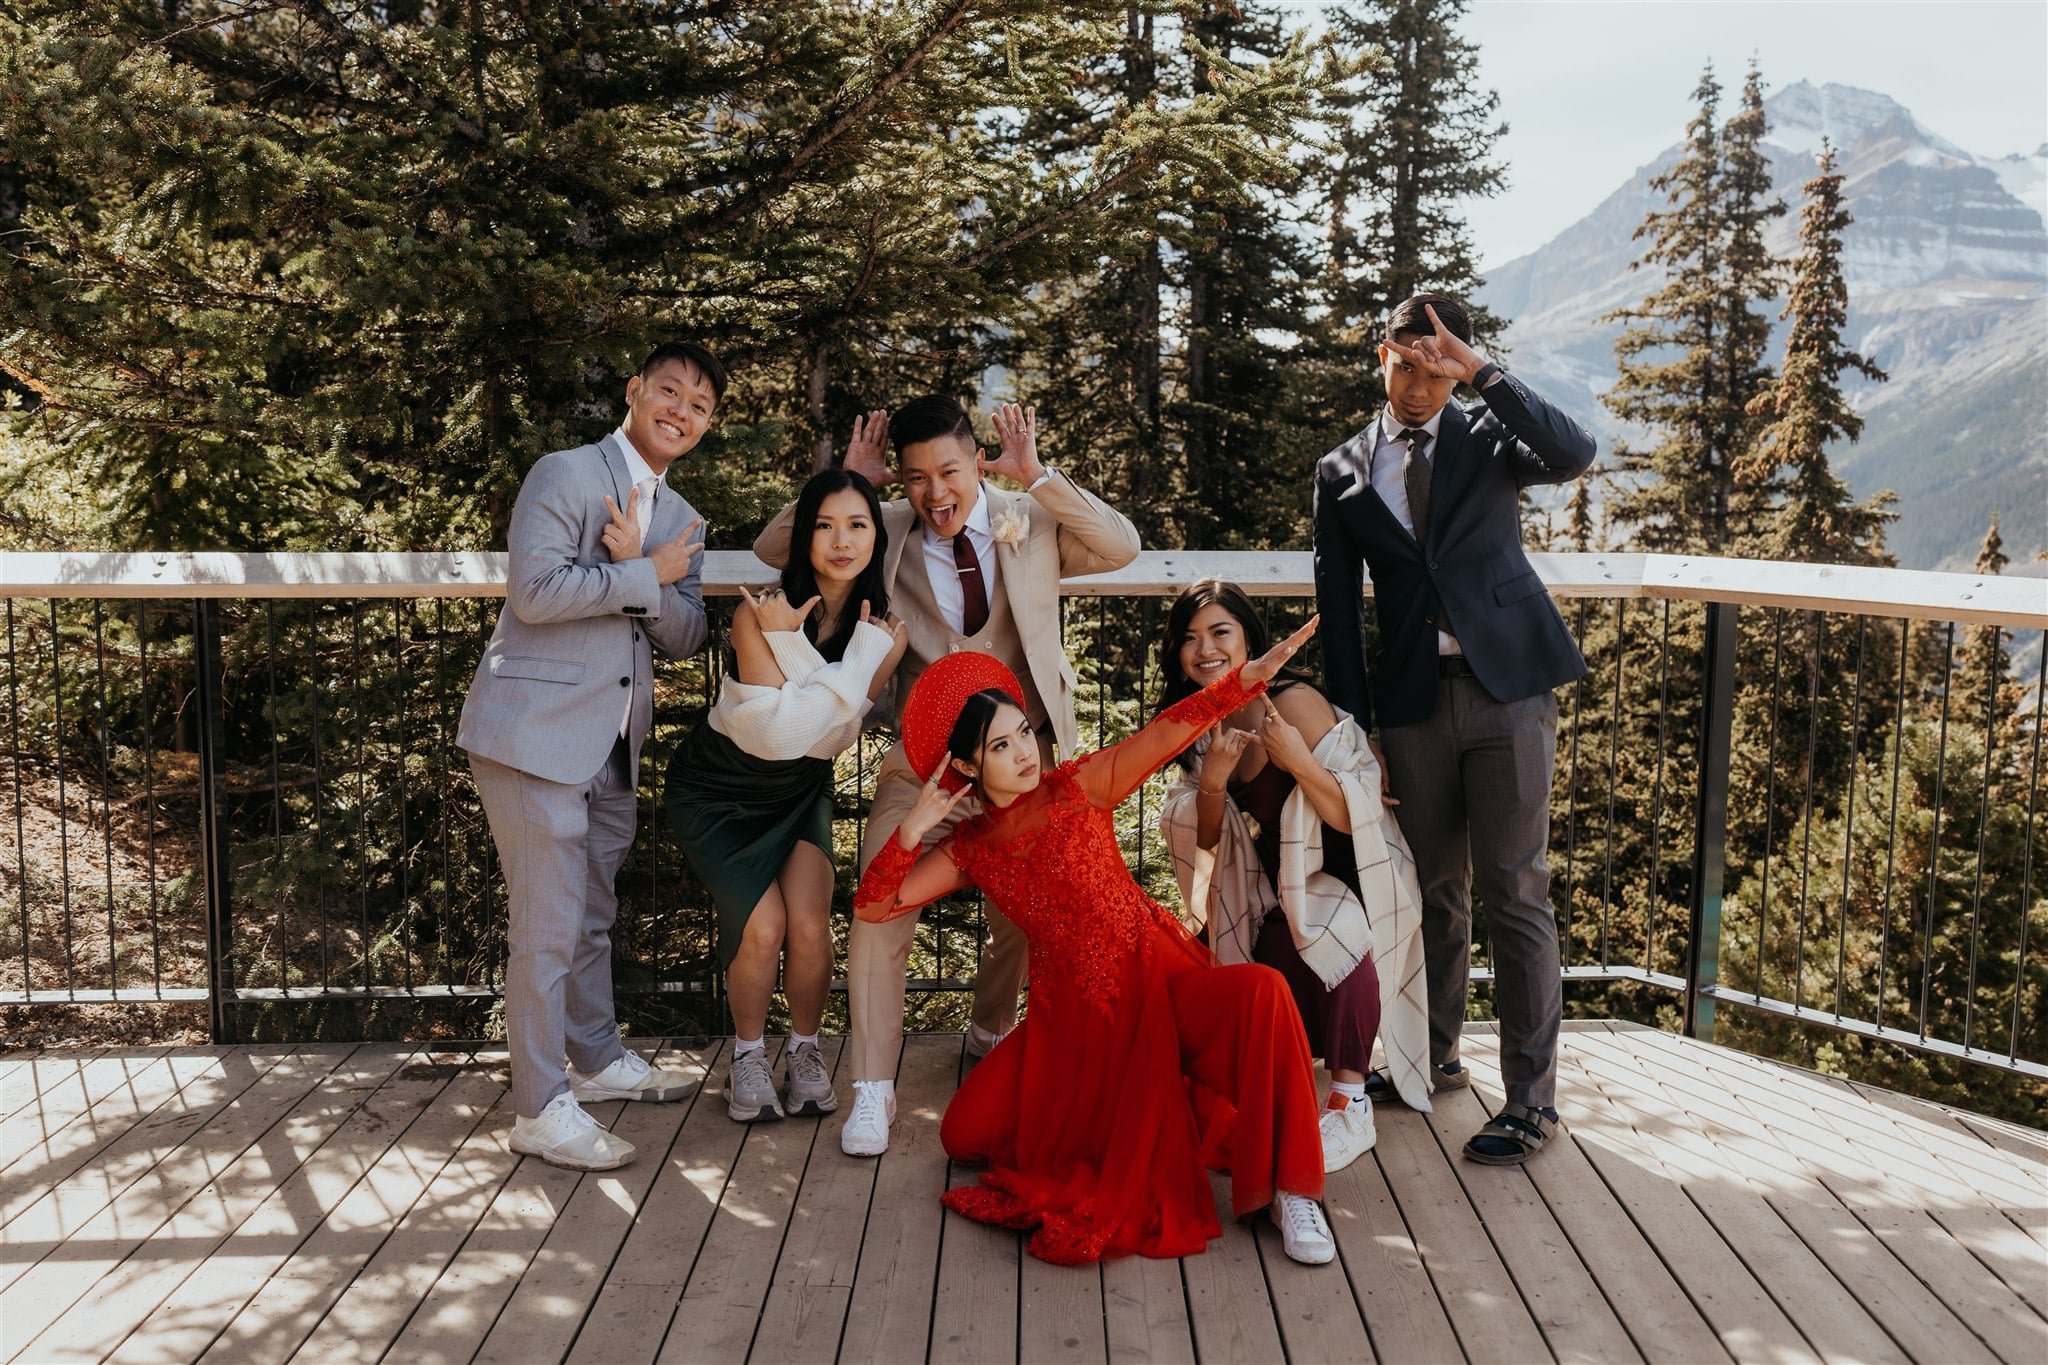 Silly family photos with Ao Dai at Banff National Park elopement